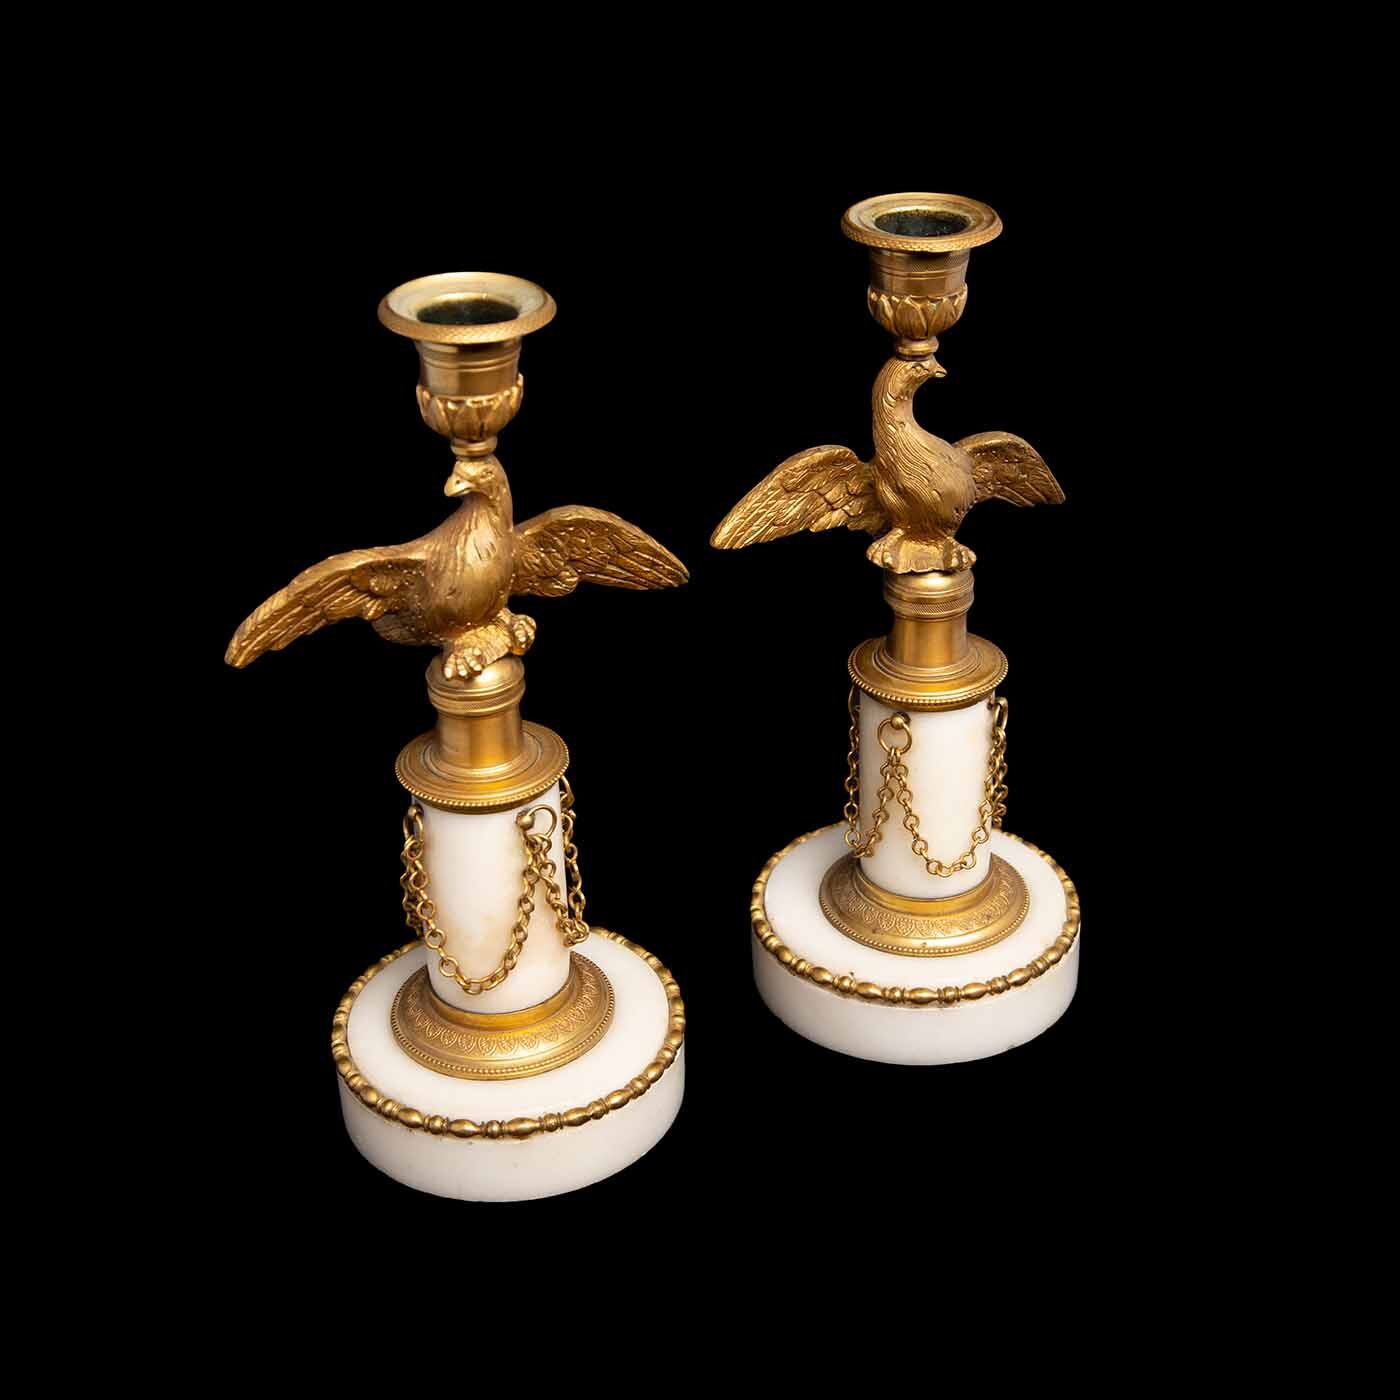 White Marble and Gilt Candle Sticks, Pair